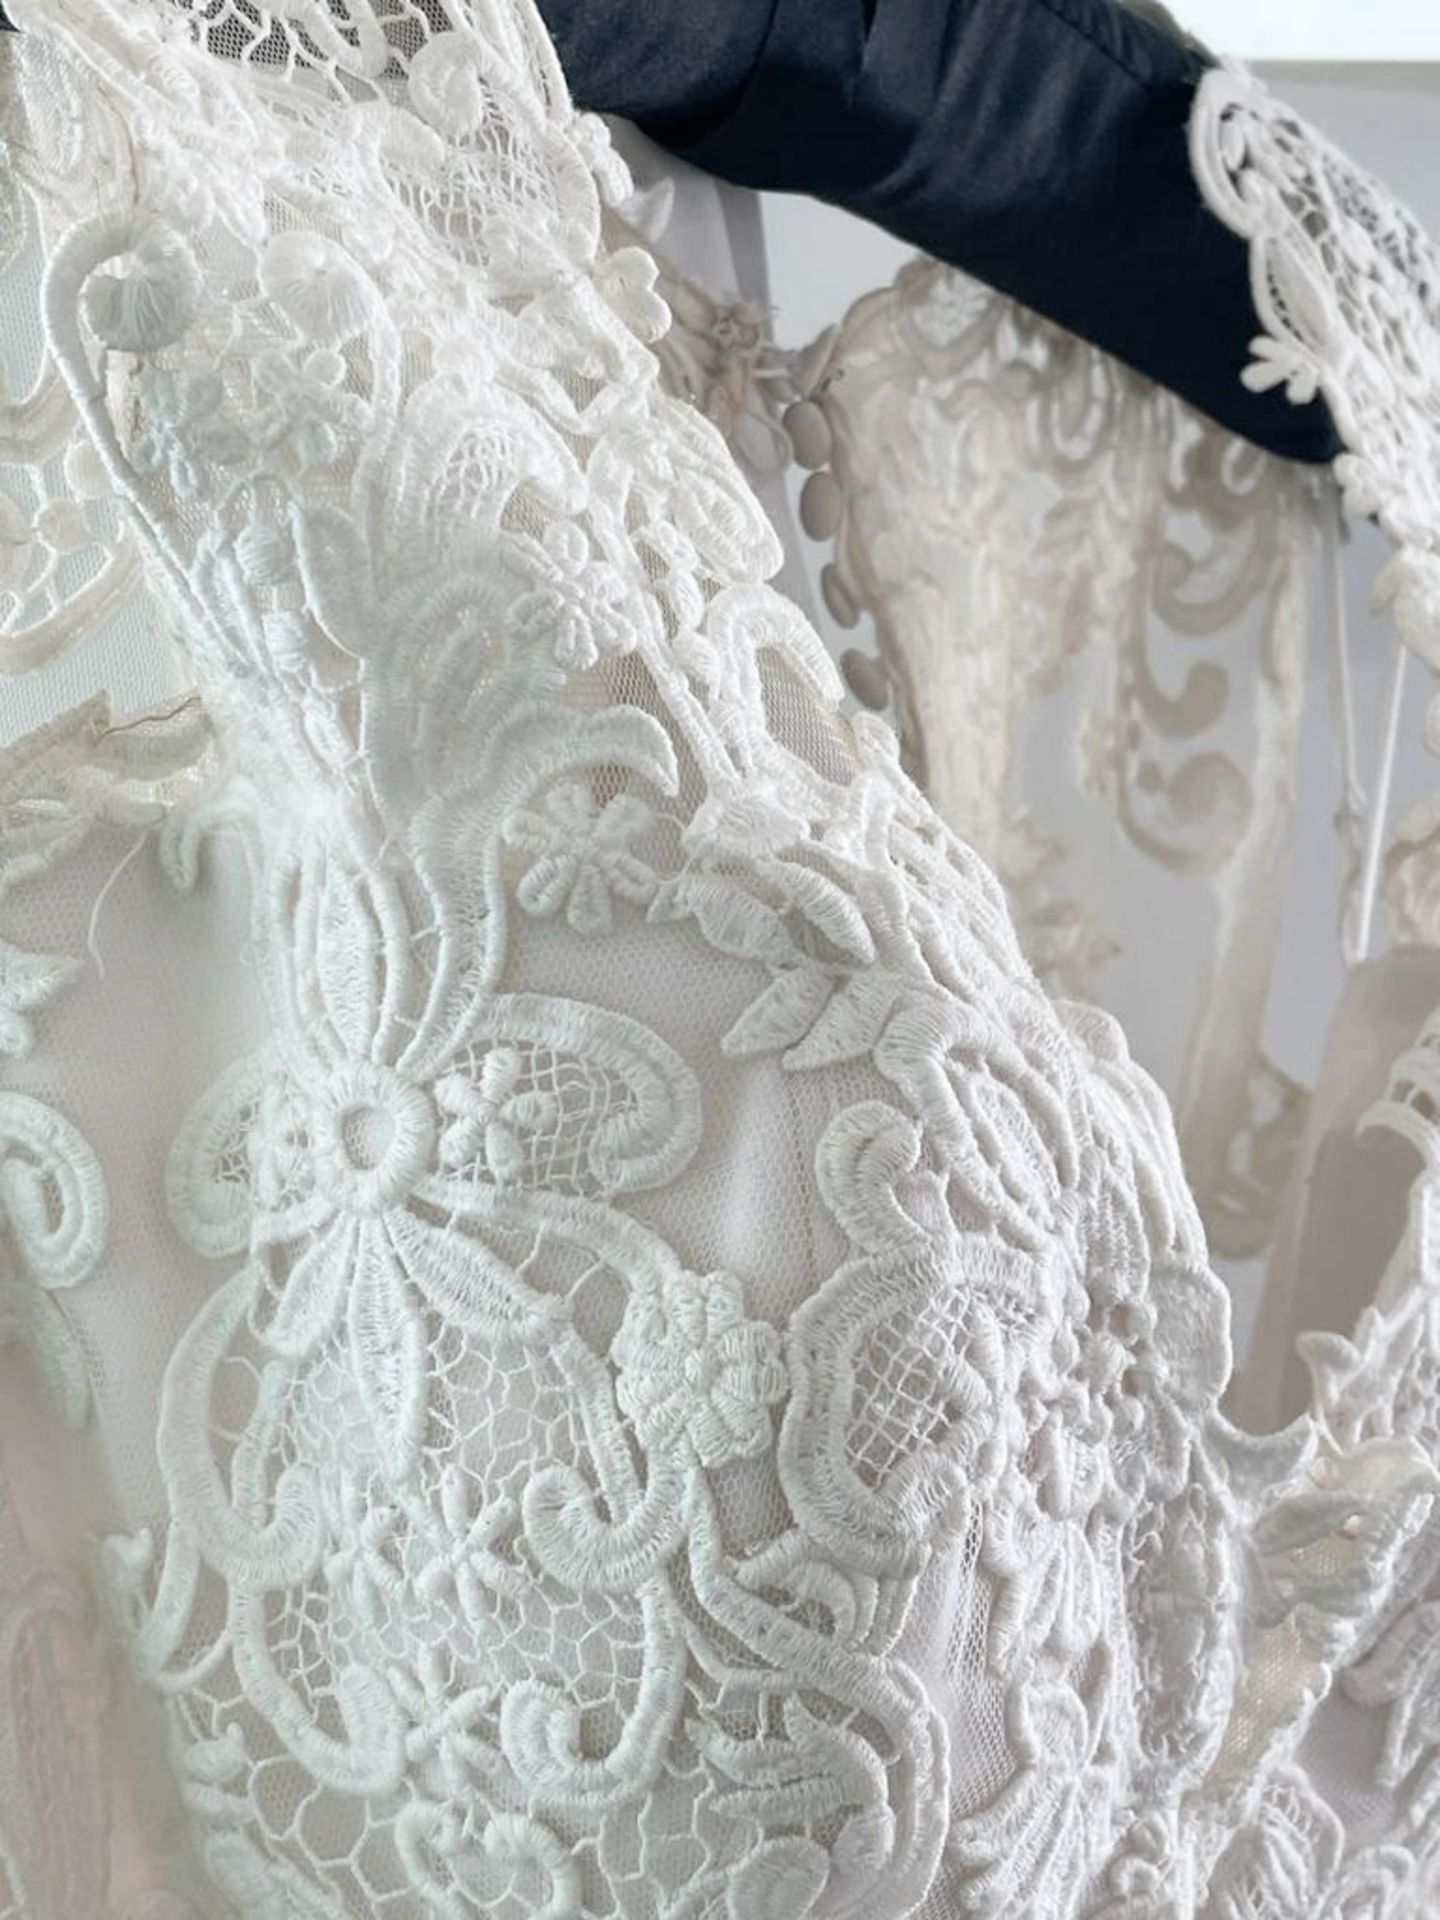 1 x LILIAN WEST 'Kate' Designer Crochet Lace Sweetheart Wedding Dress Bridal Gown, With Silk Flowing - Image 8 of 14